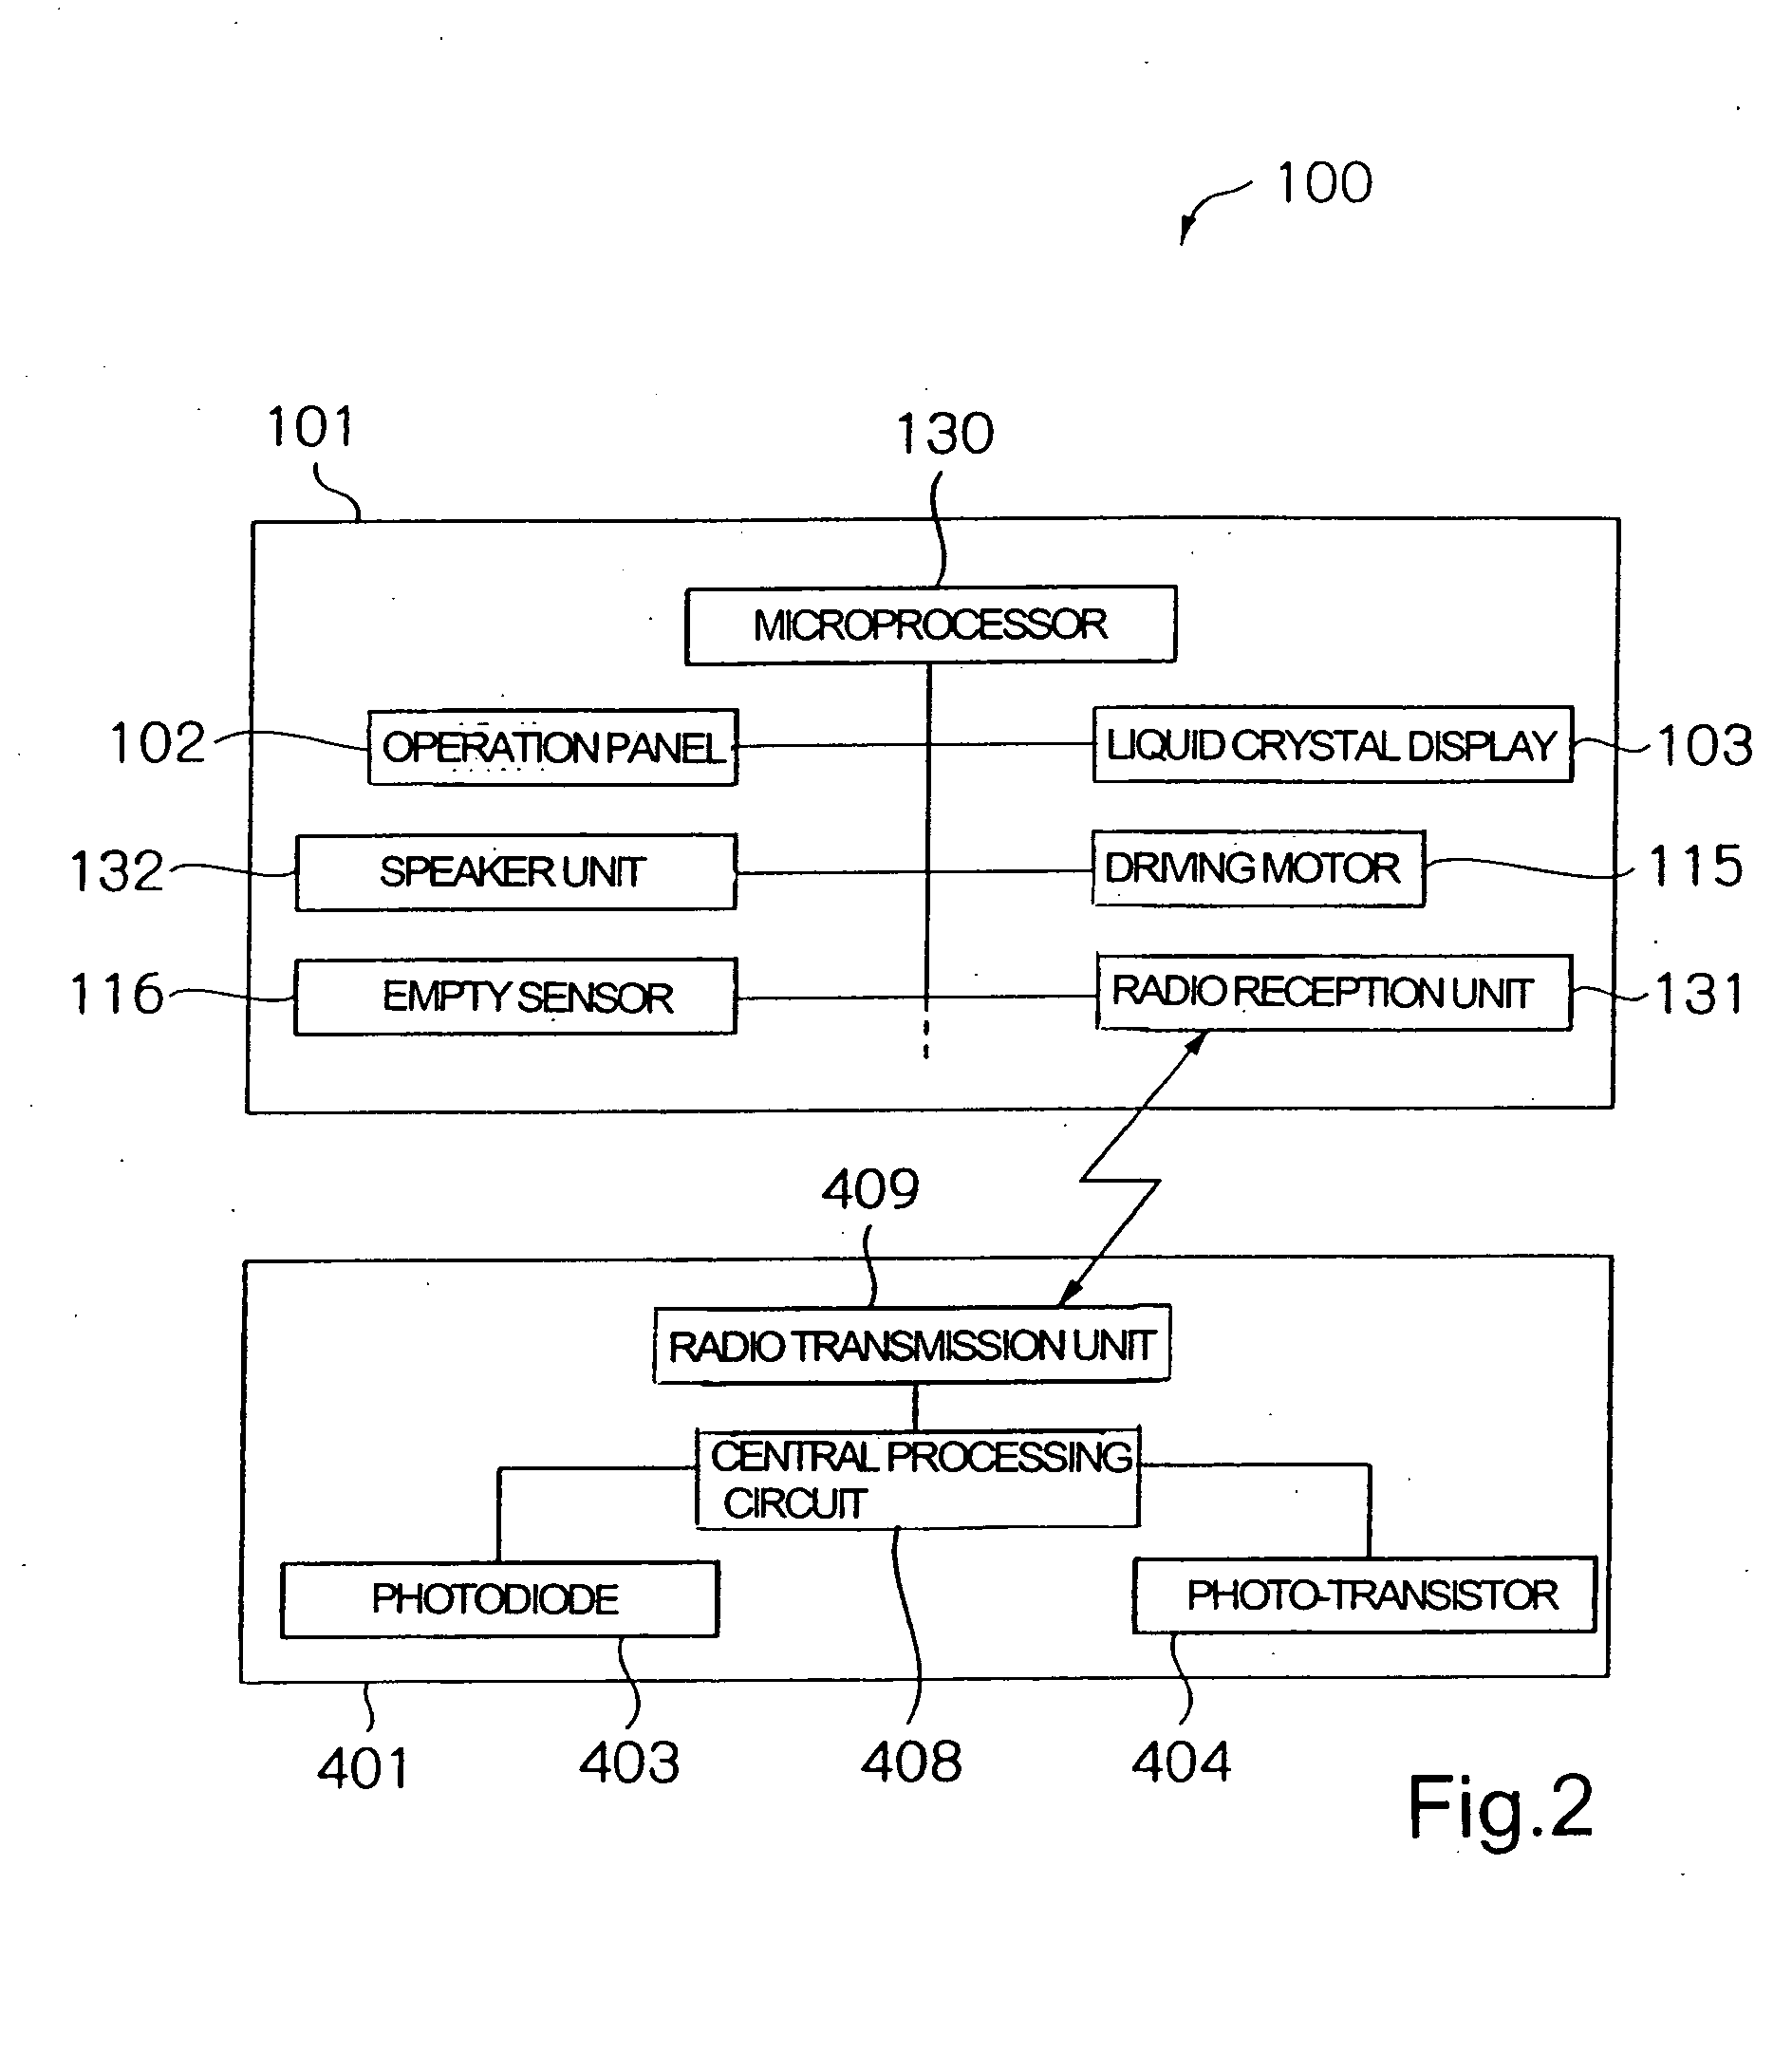 Leak detector for detecting leak of liquid injected into blood vessel using pulse signal